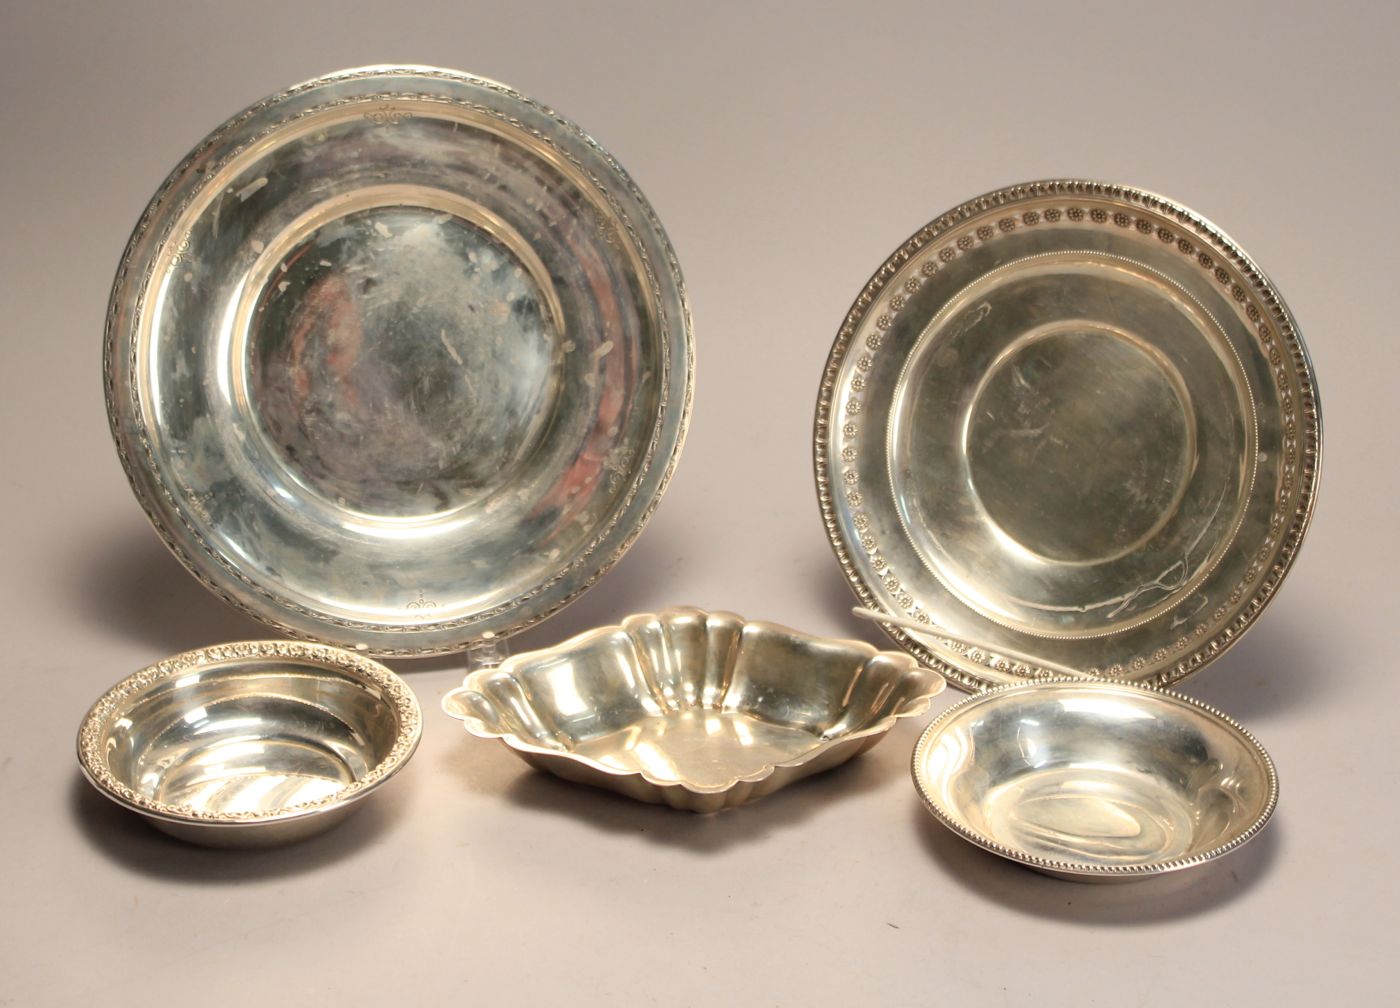 FIVE PIECES OF STERLING SILVER